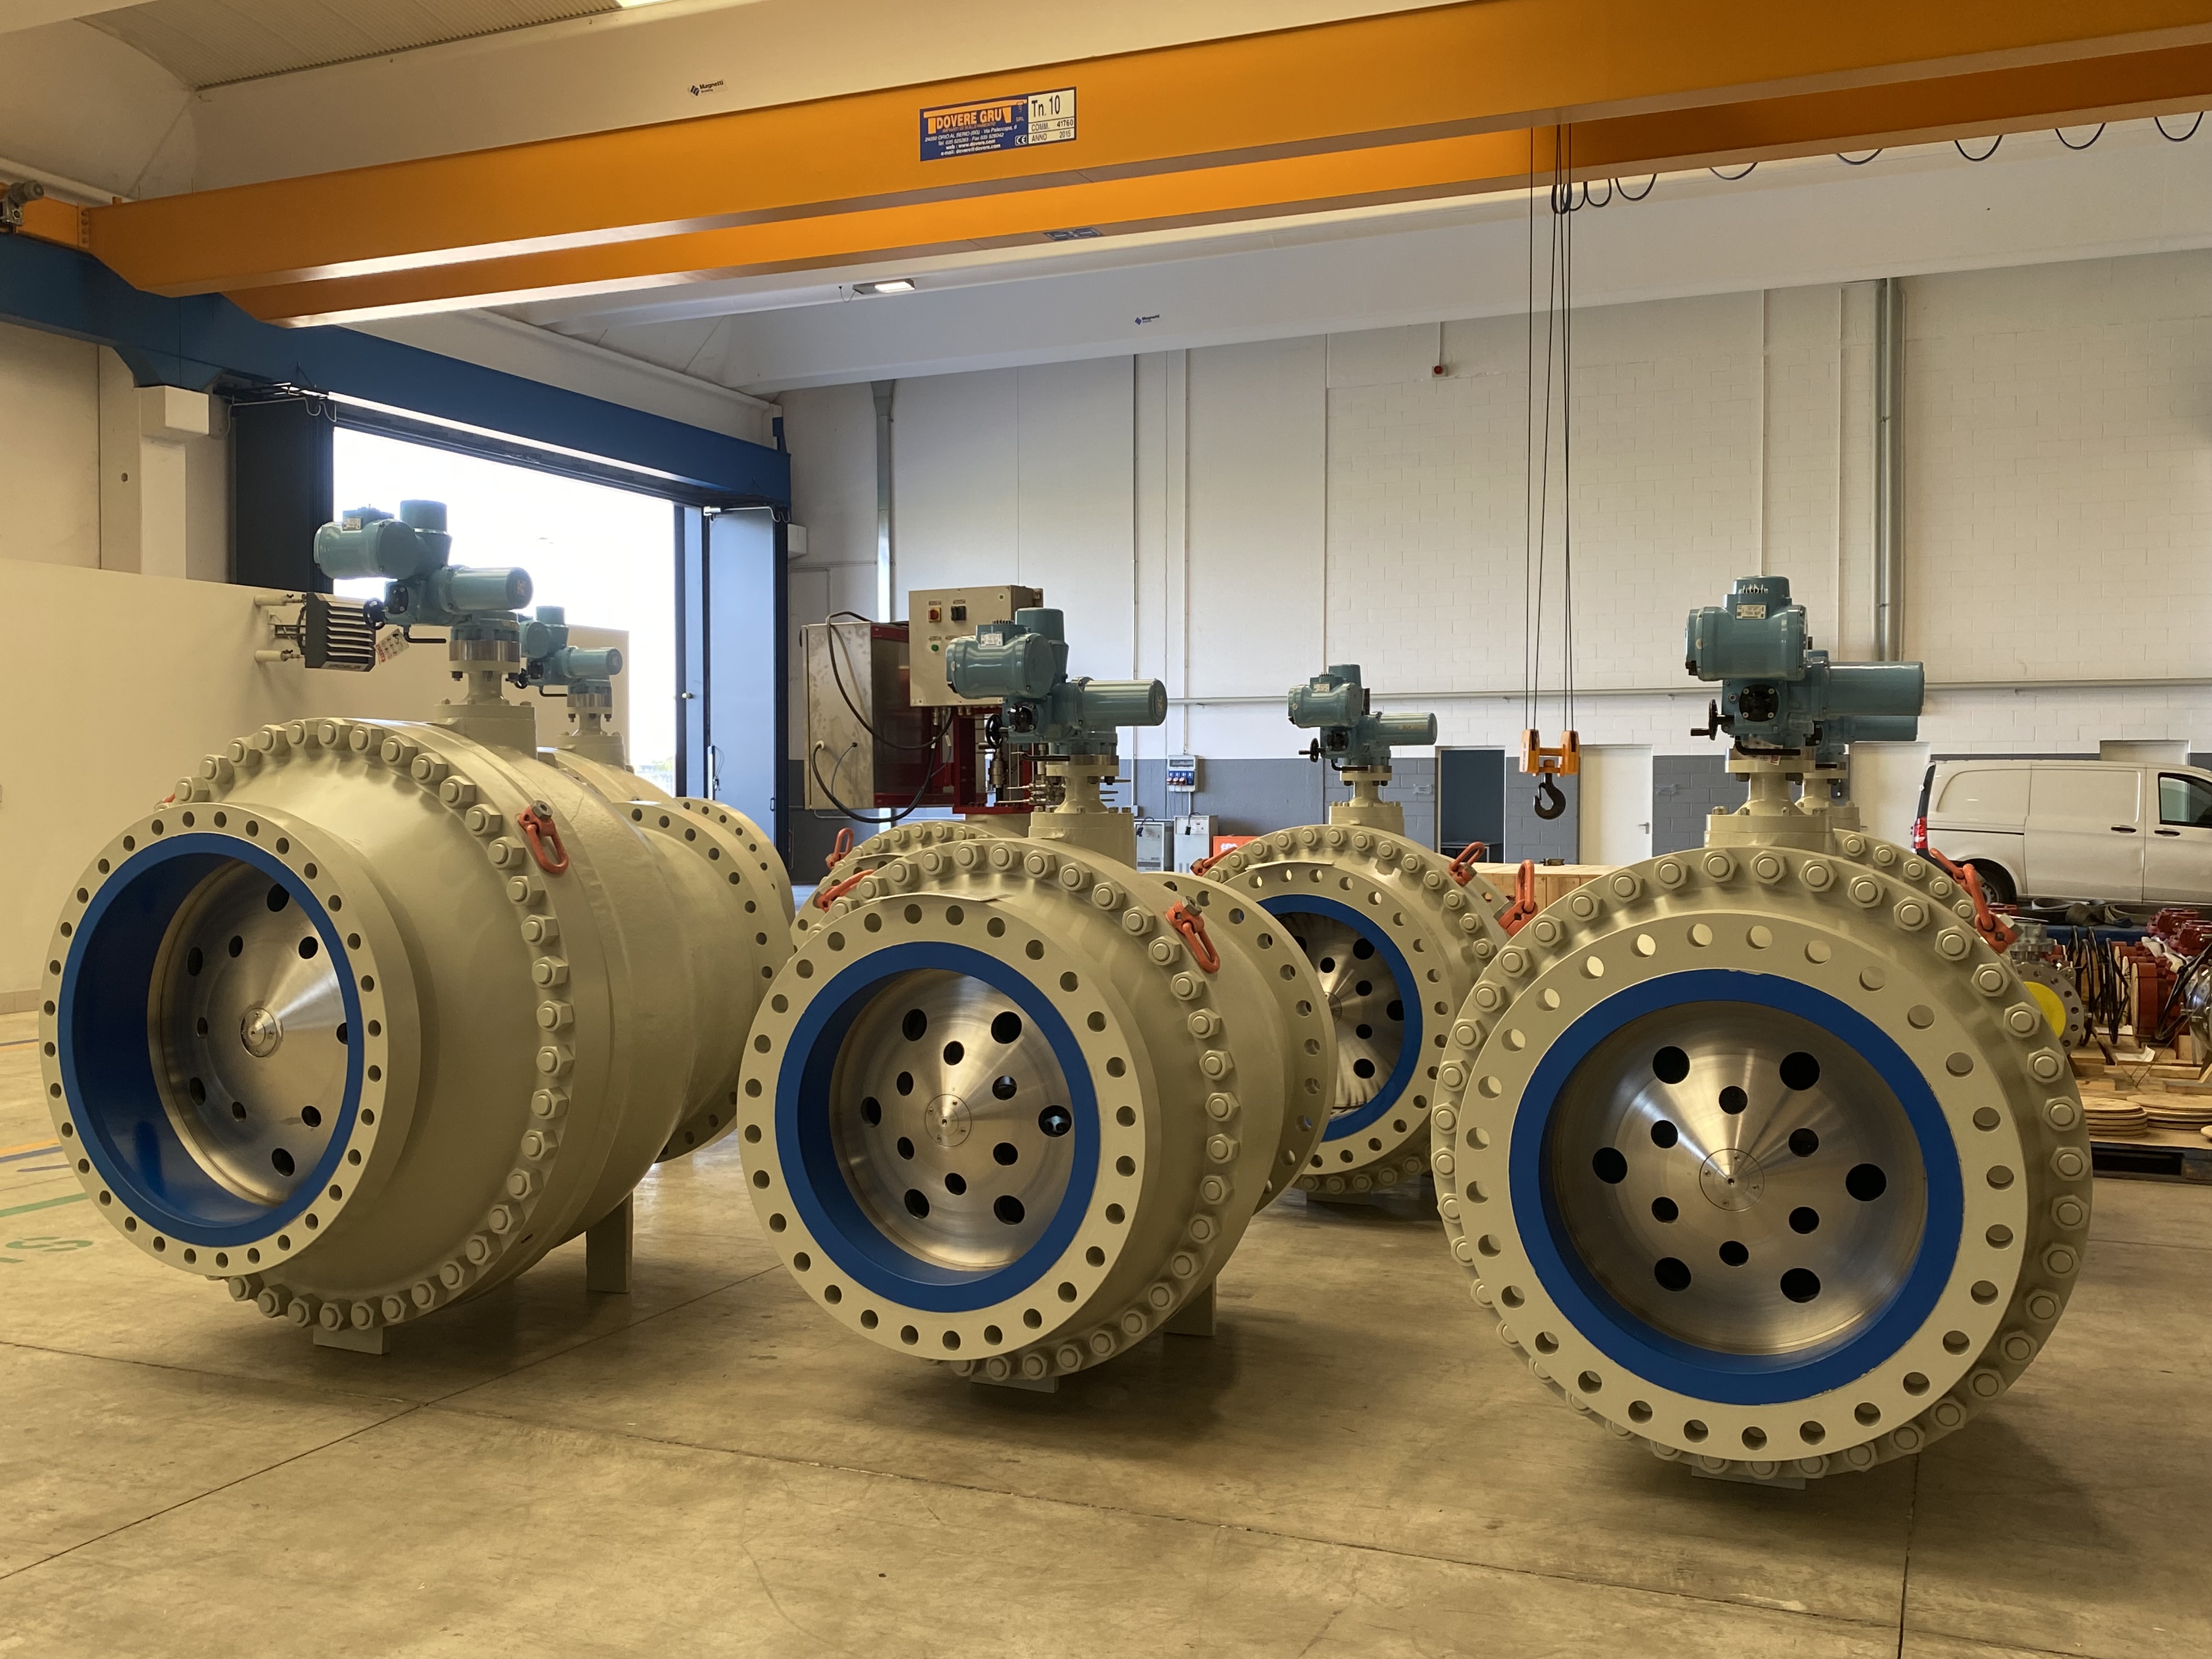 Axial Flow Valves for Desalination plant